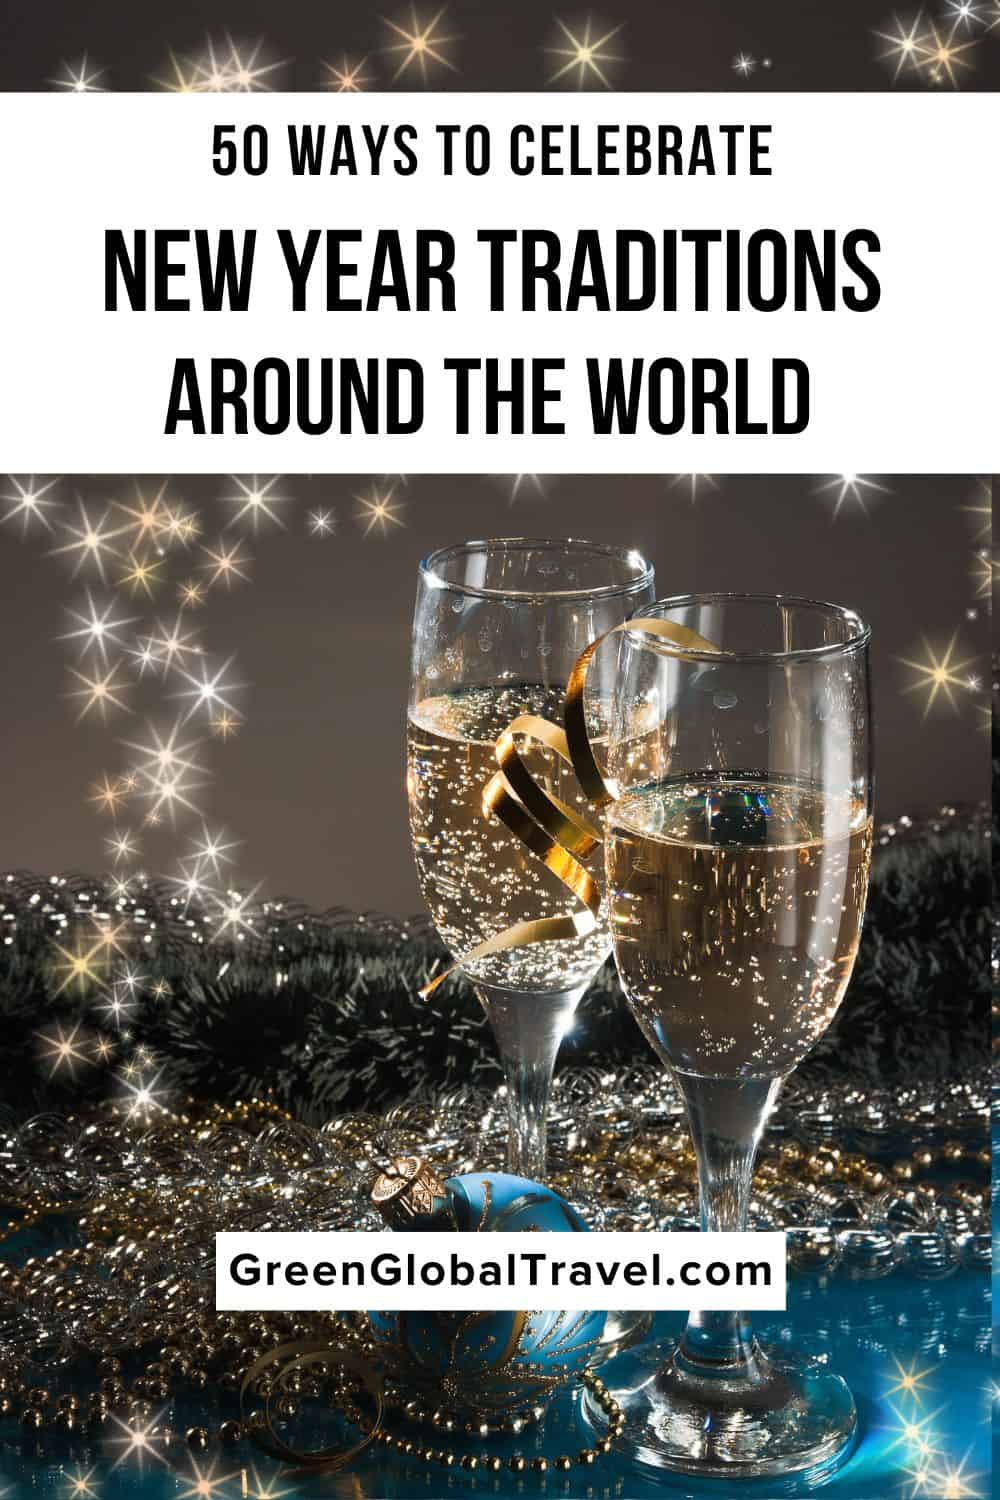 50 Ways to Celebrate New Year Traditions Around the World including New Year's Eve Food Traditions, New Year's Good Luck Traditions, New Year's Festivals, How to celebrate the New Year at Home, New Year's Clothing, New Year's Eve Traditions Around the World and more! new year wishes | new year's day food | new years eve food traditions | new year's eve traditions | new year good luck traditions | new year's food traditions around the world | new year customs | new years superstition